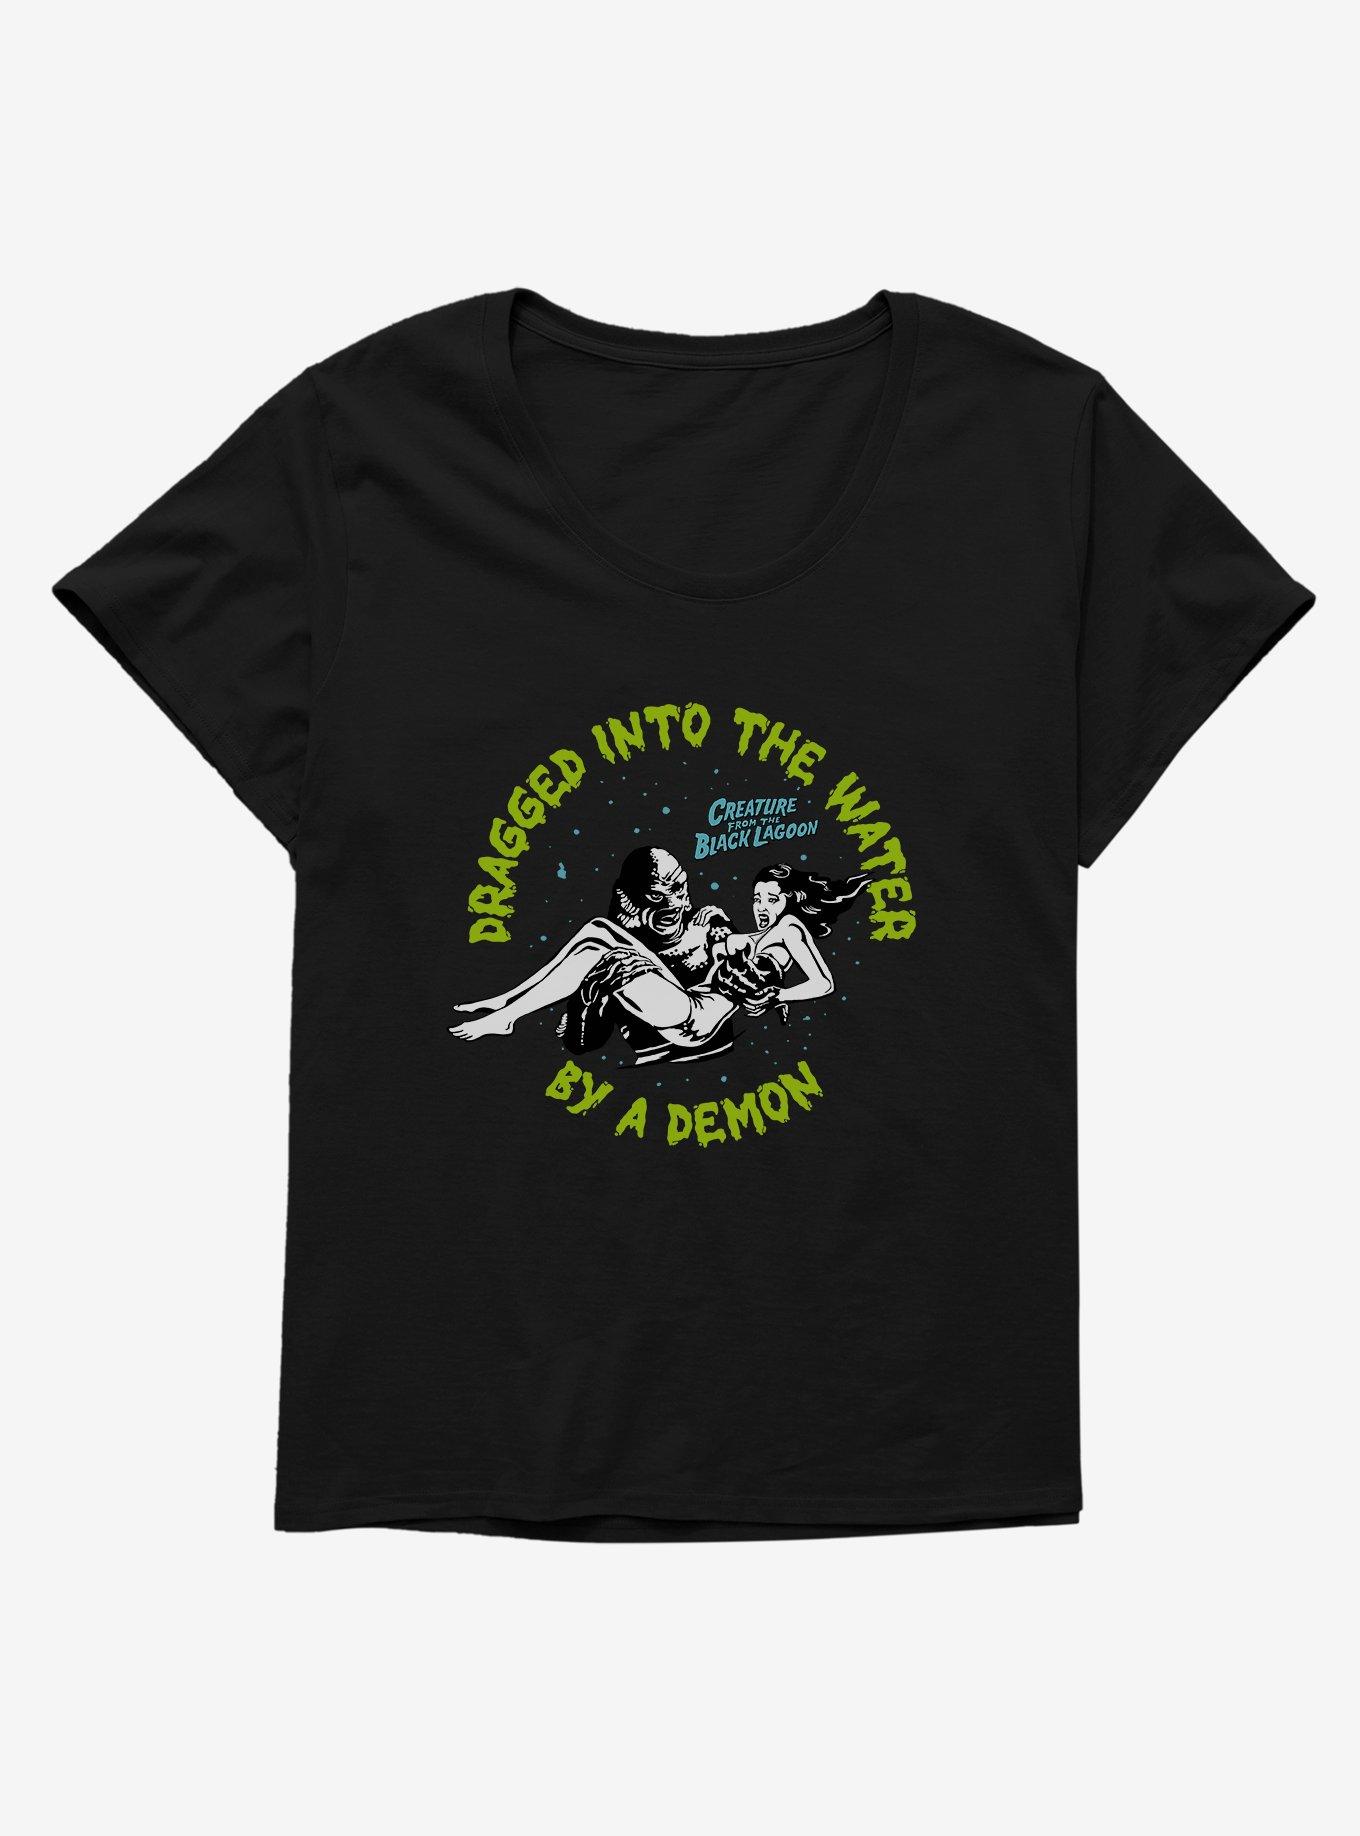 Creature From The Black Lagoon Dragged Into The Water Girls T-Shirt Plus Size, BLACK, hi-res